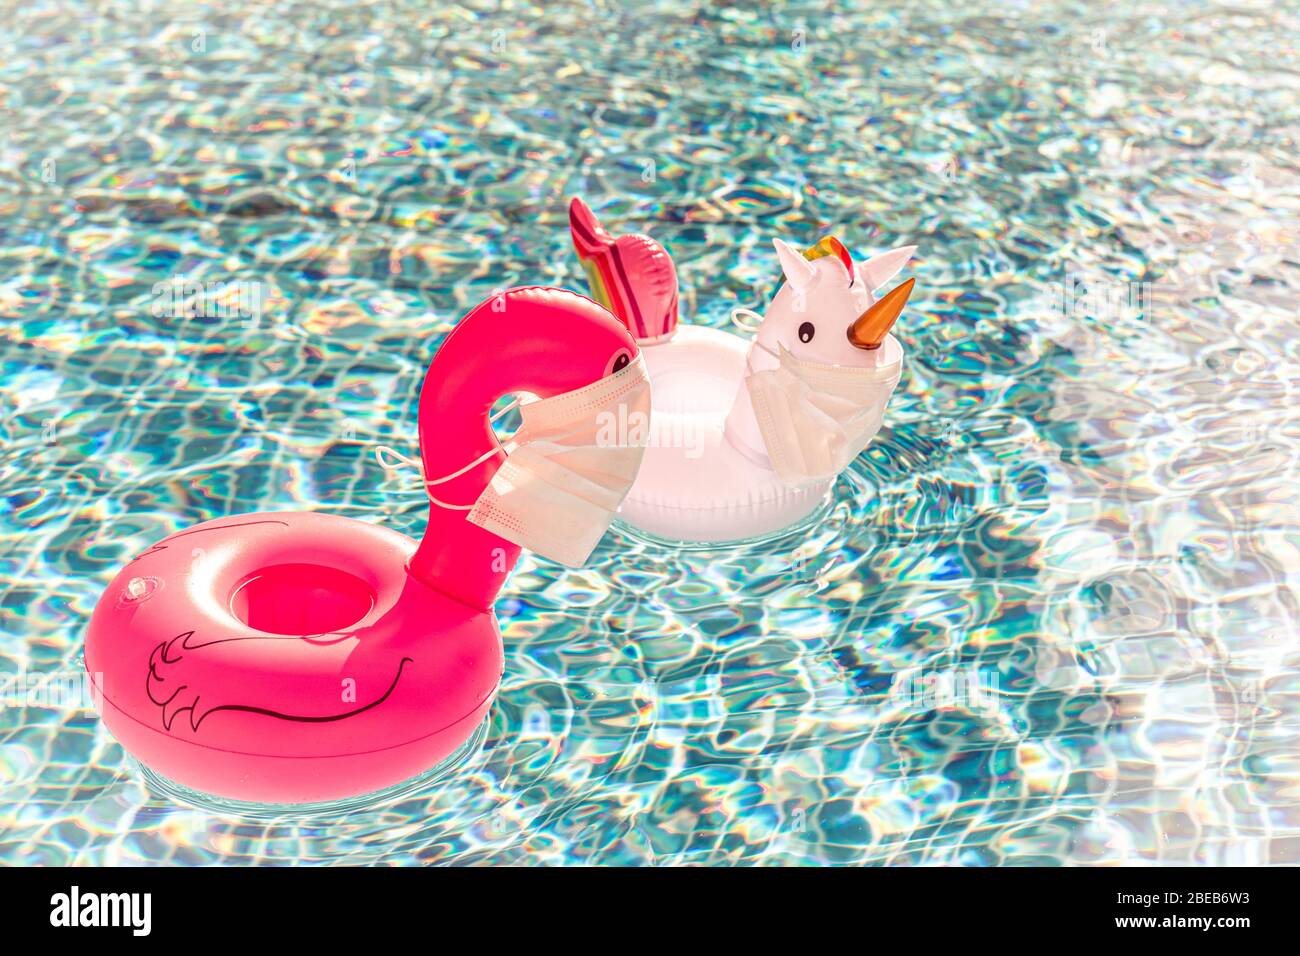 Swimming pool toys unicorn and flamingo in a medical face mask. Concept of Coronavirus outbreak impact on a travel industry for summer season 2020 Stock Photo